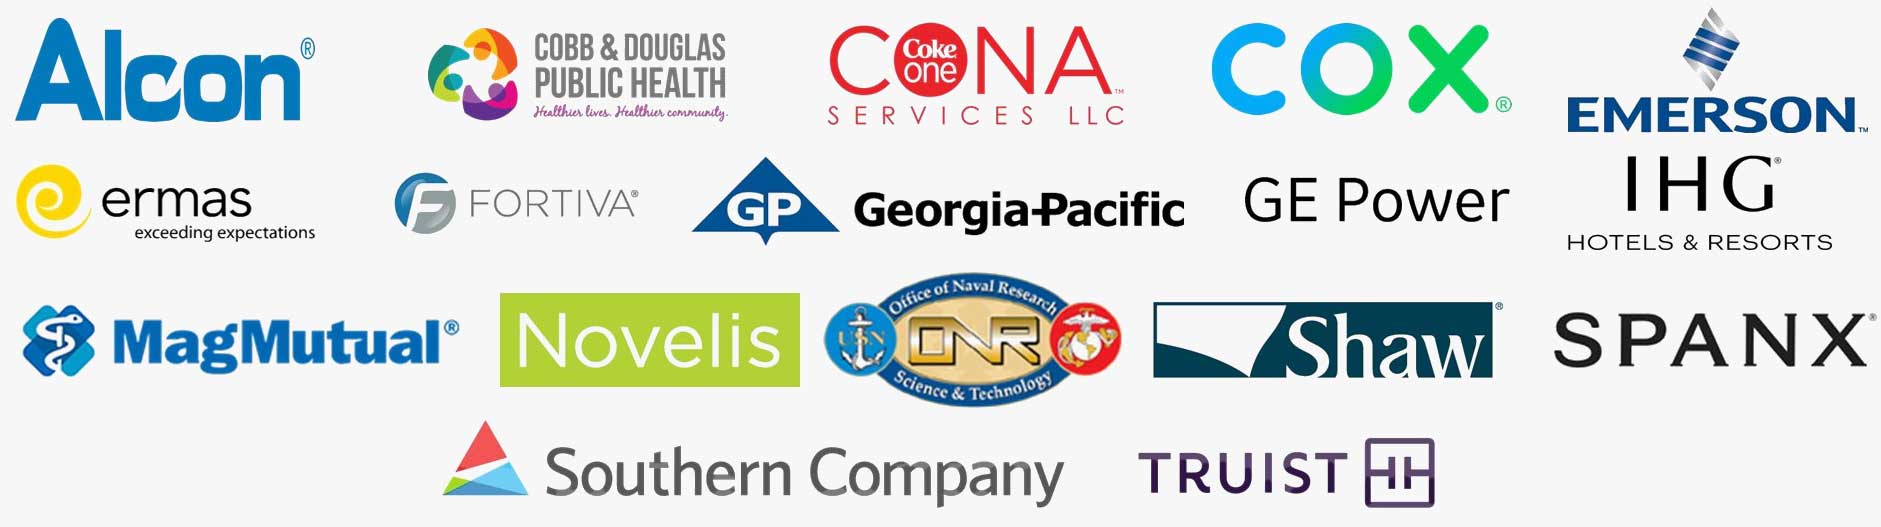 Past CDSA Partners logos include; Alcon, Cobb and Douglas Public Health, Cona Coke One Services, Emerson, Ermas, Fortiva, Georgia-Pacific, GE Power, IHG Hotels & Resorts, MagMutual, Novelis, Office of Navel Research, Shaw, Spanx, Southern Company, Truist.